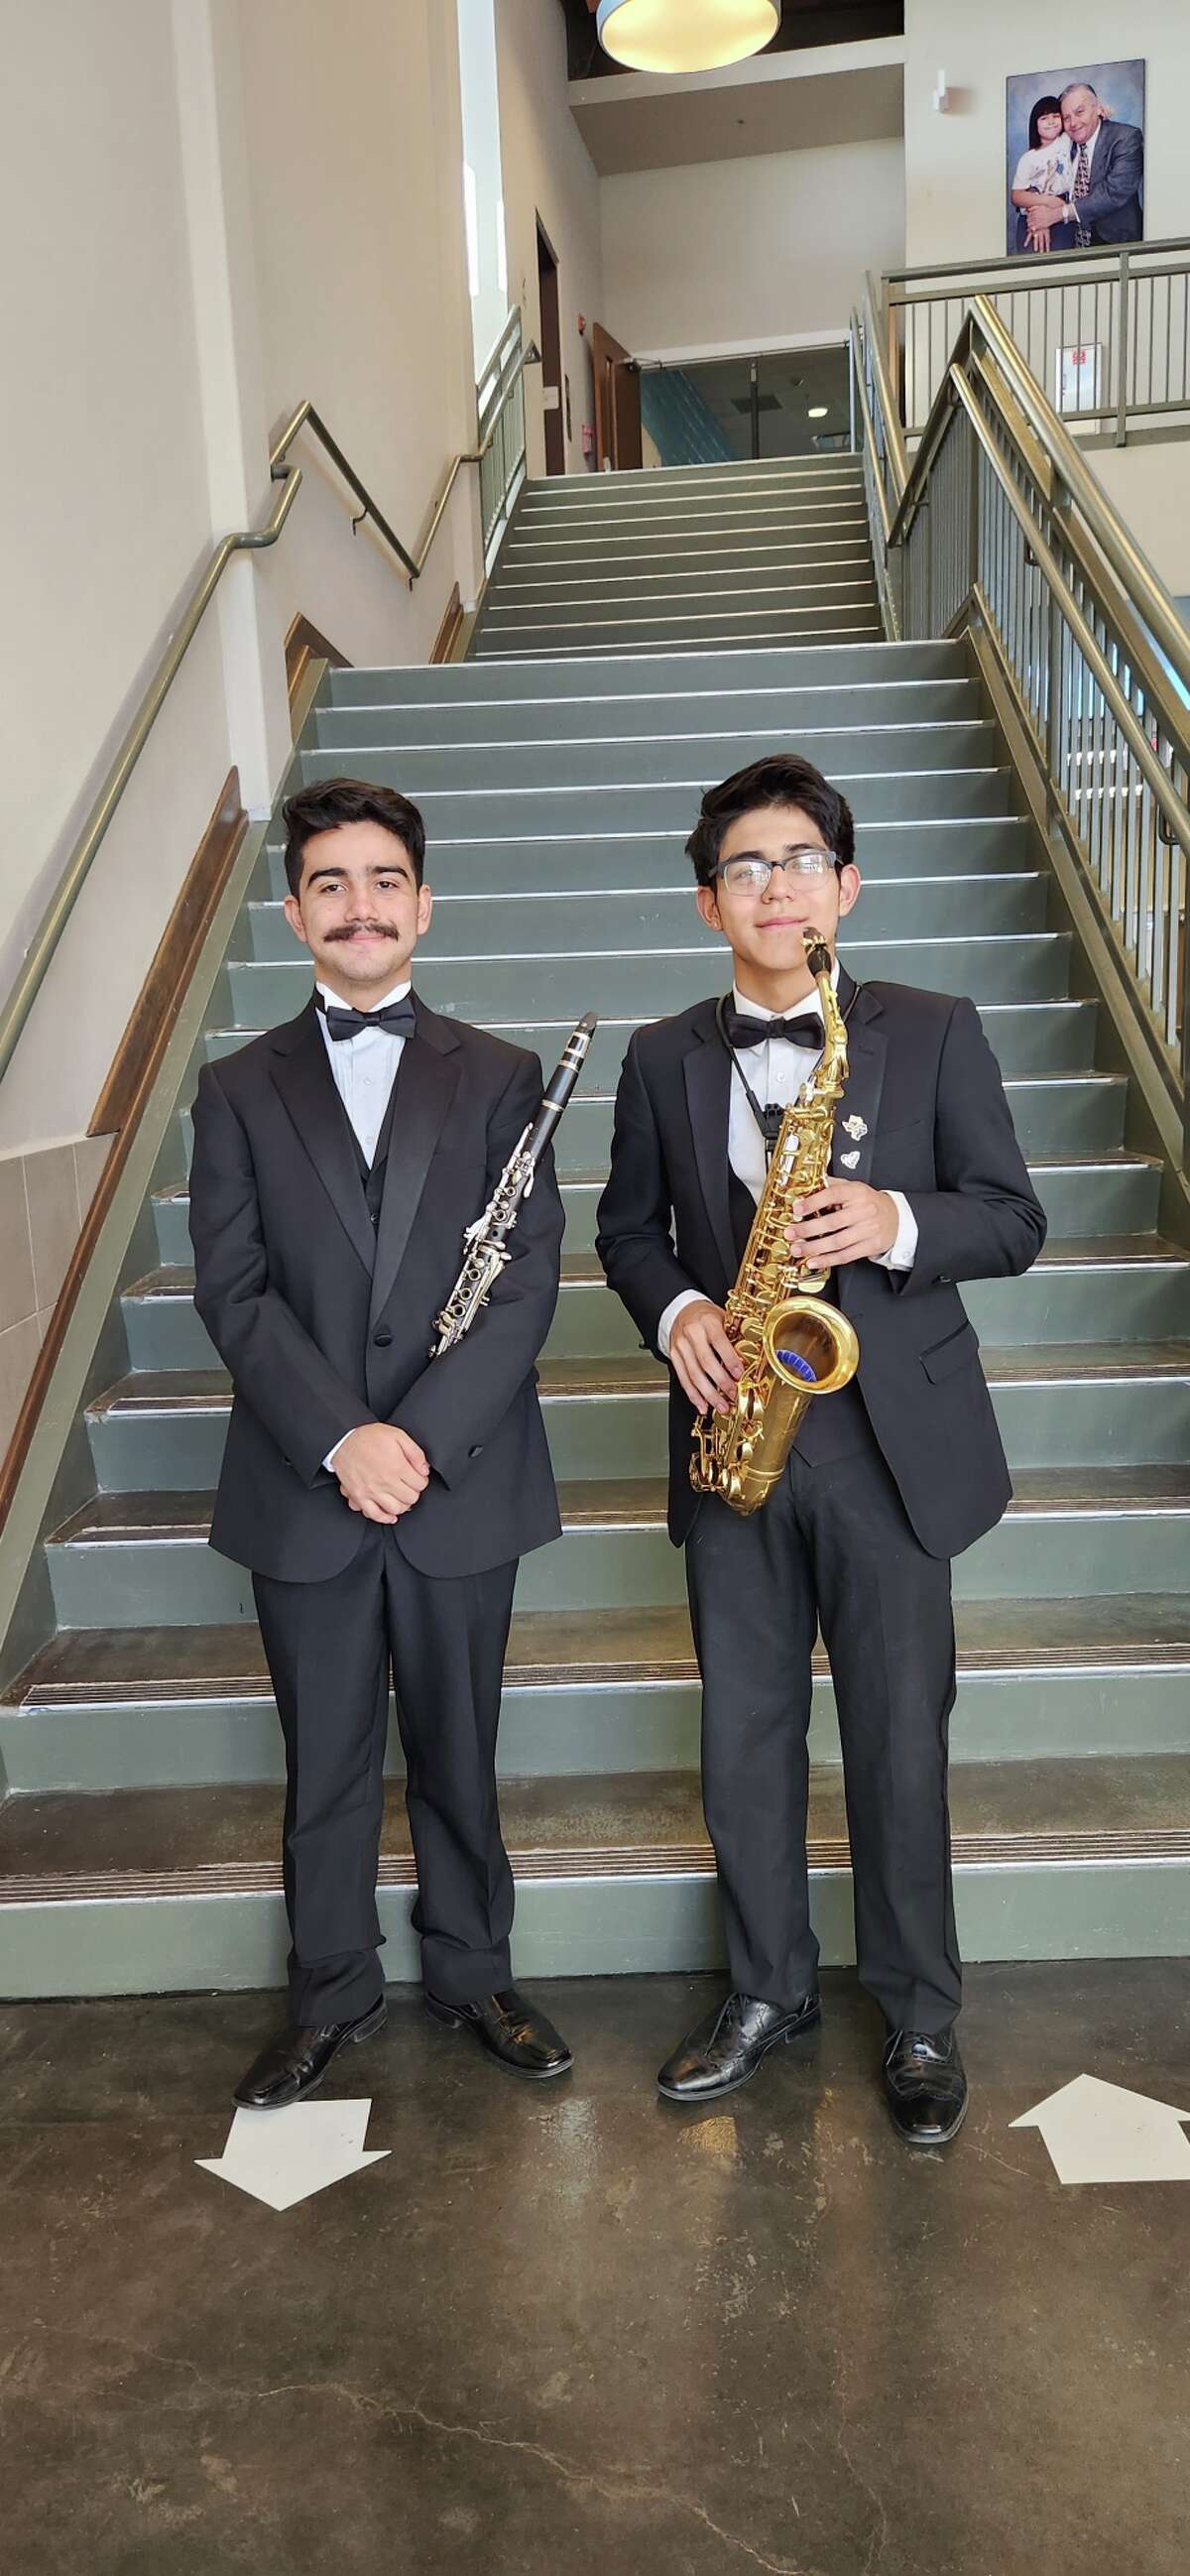 Martin High School senior Nestor Olguin and Nixon High School senior Carlos Carreon Gonzalez were recently named as members of the Texas Music Educators Association All-State Band.